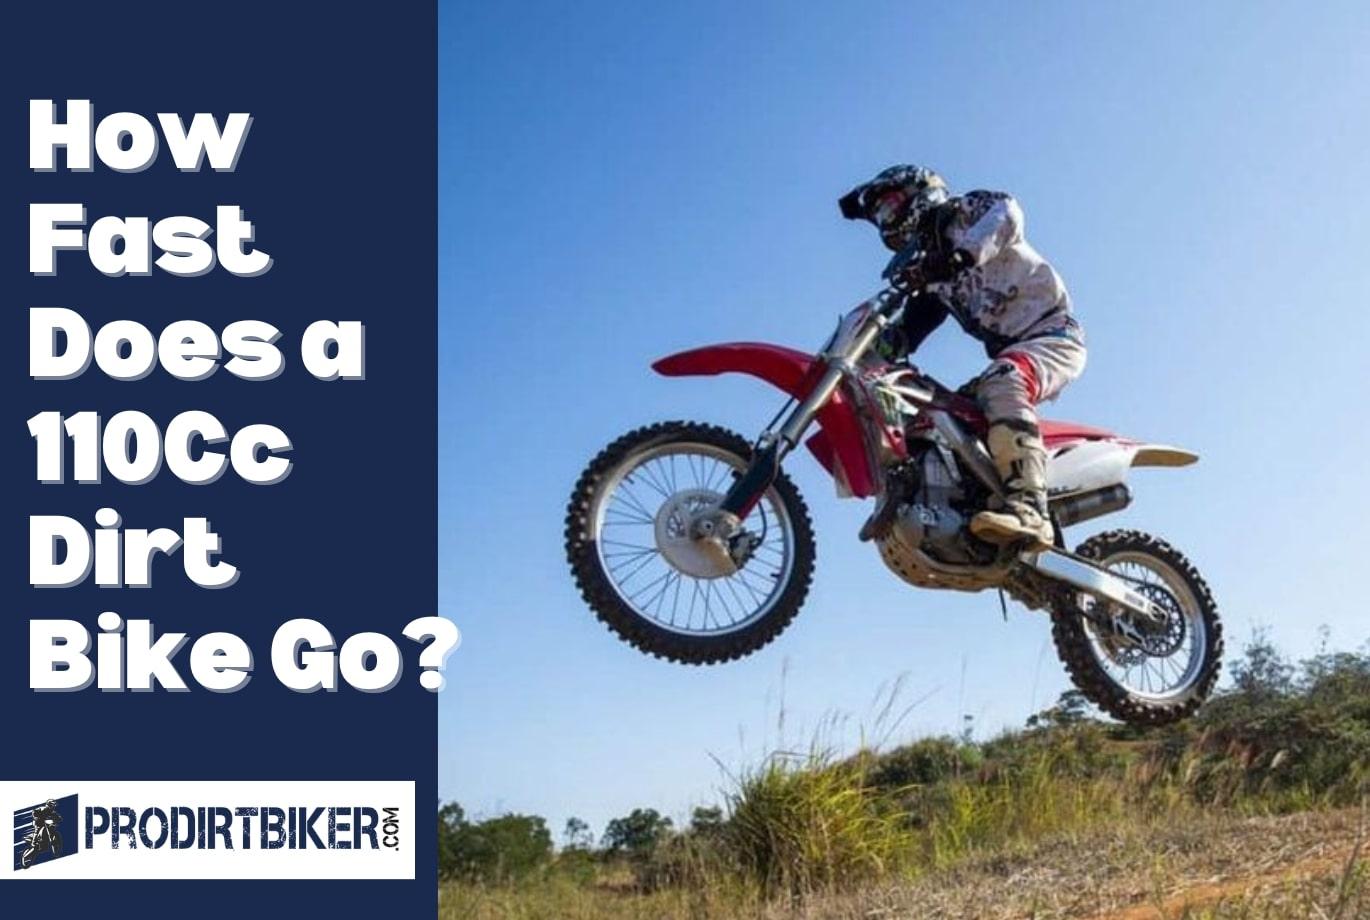 How Fast Does a 110Cc Dirt Bike Go?